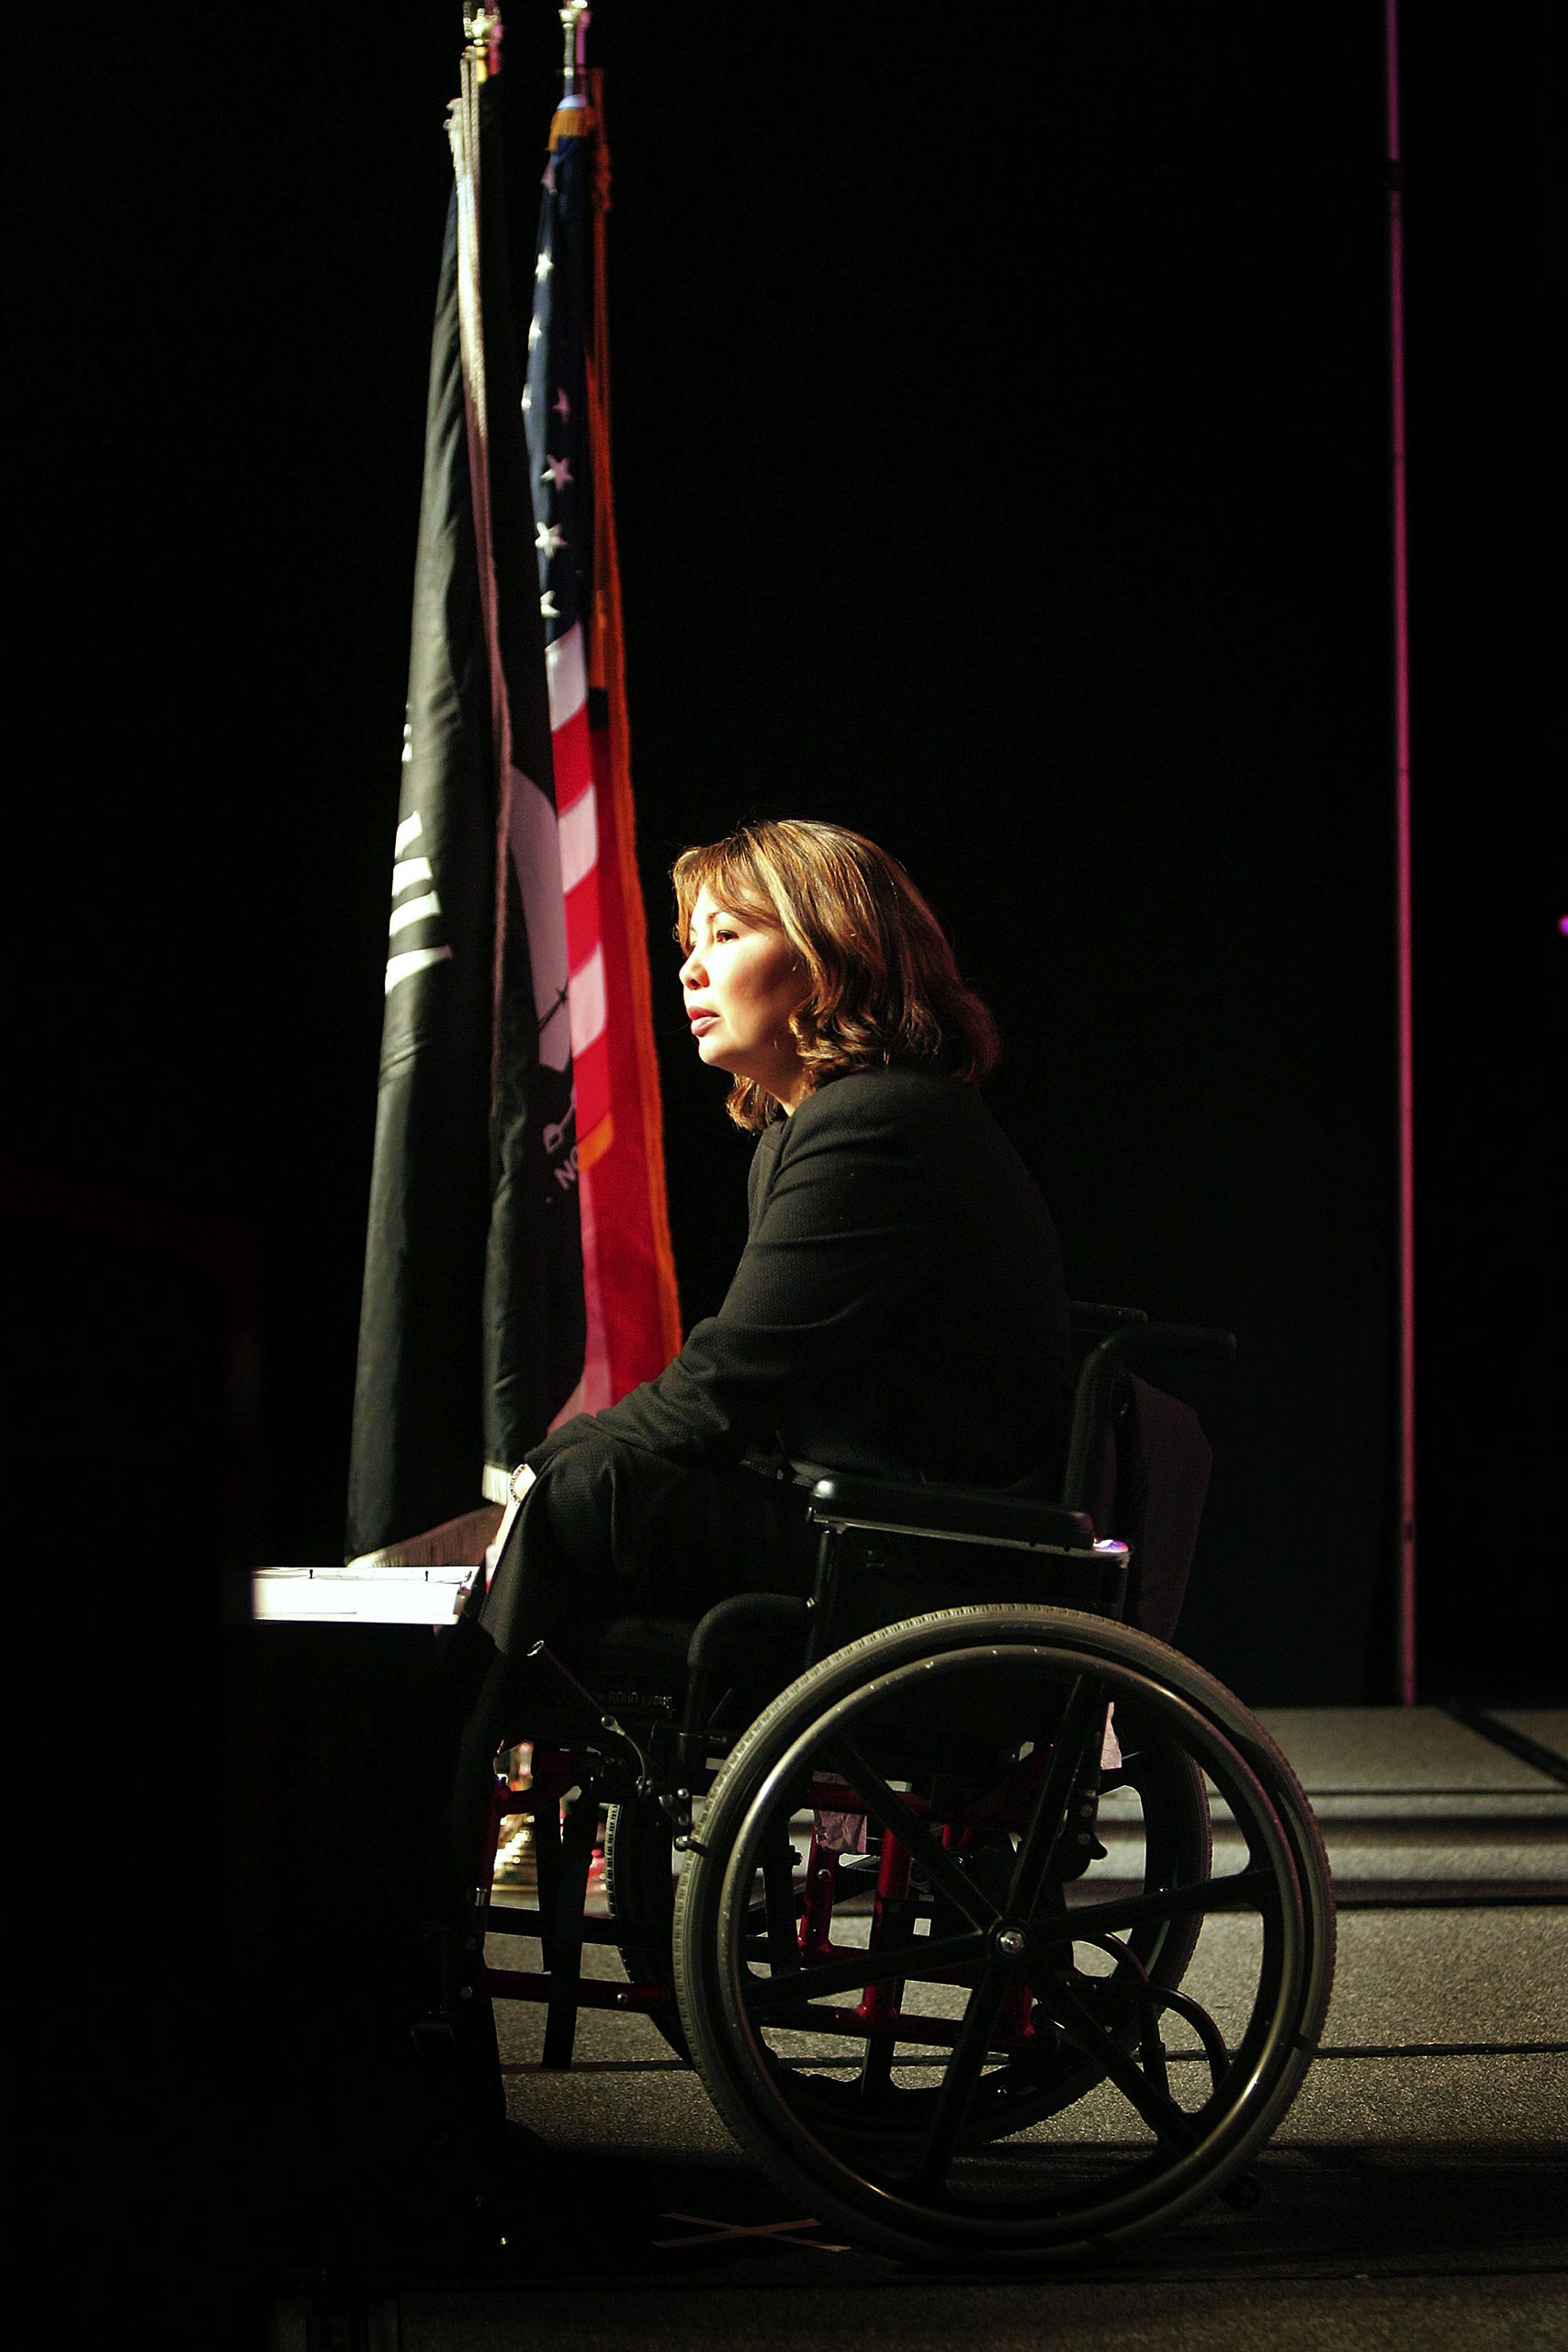 Tammy Duckworth speaks to the National Symposium for the Needs of Young Veterans hosted by AMVETS October 19, 2006 in Chicago, Illinois.